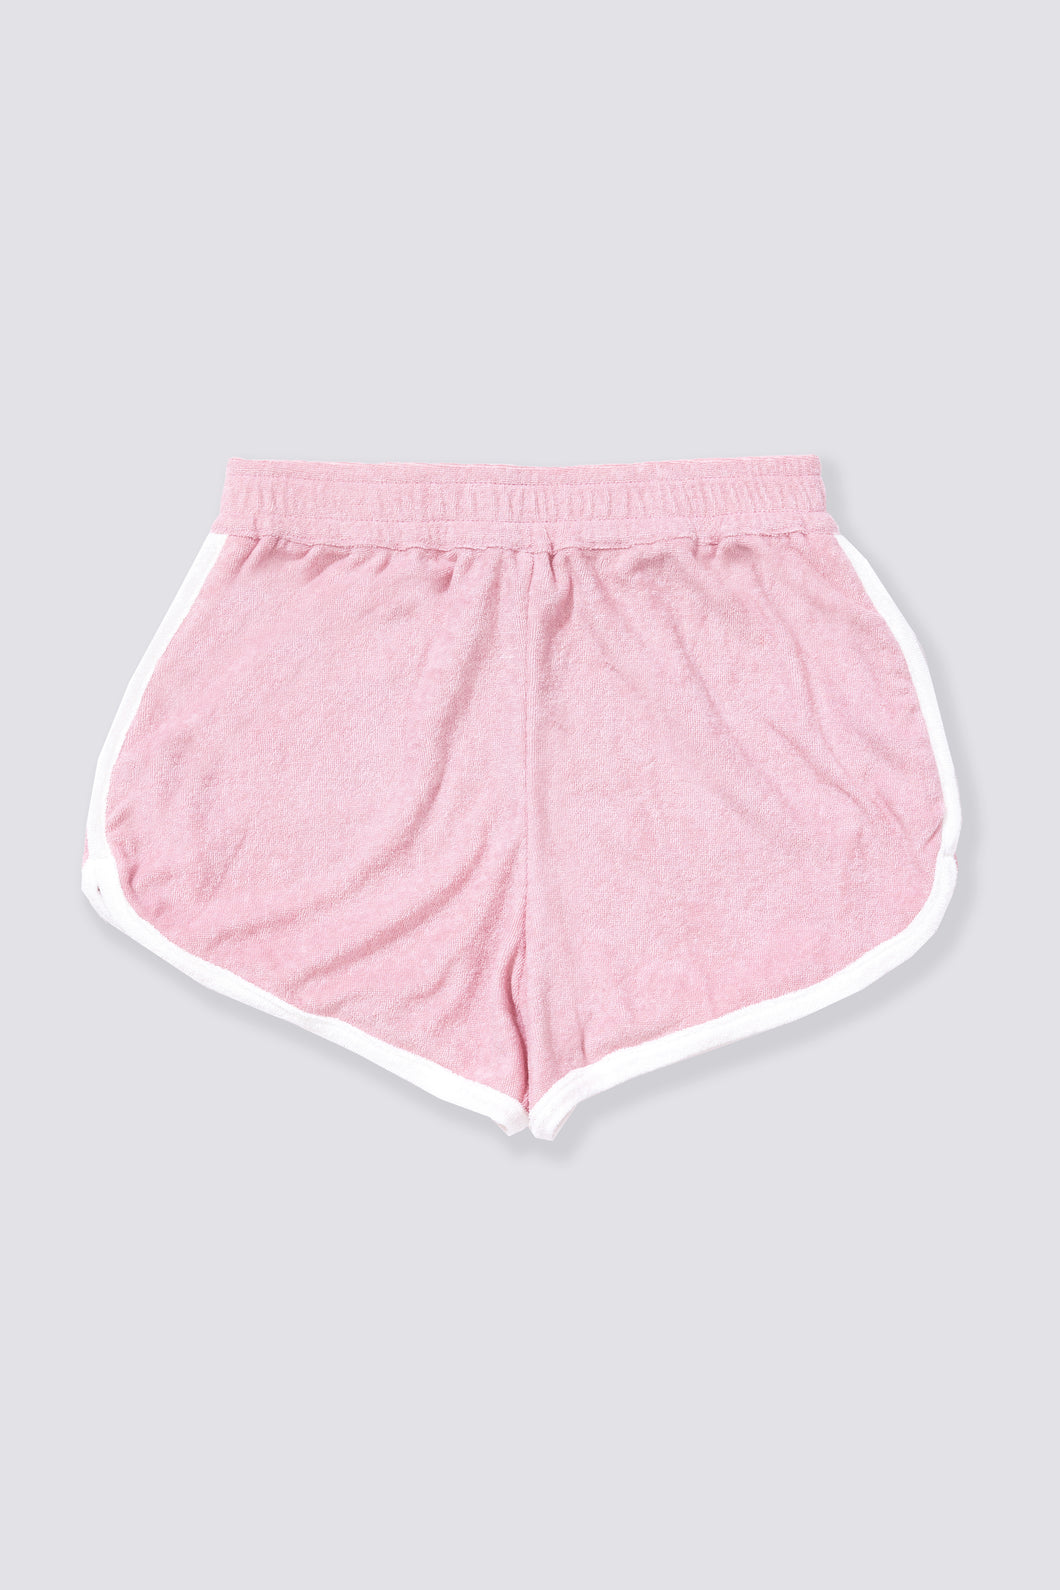 Roller Terry Shorts - Palm Springs Pink